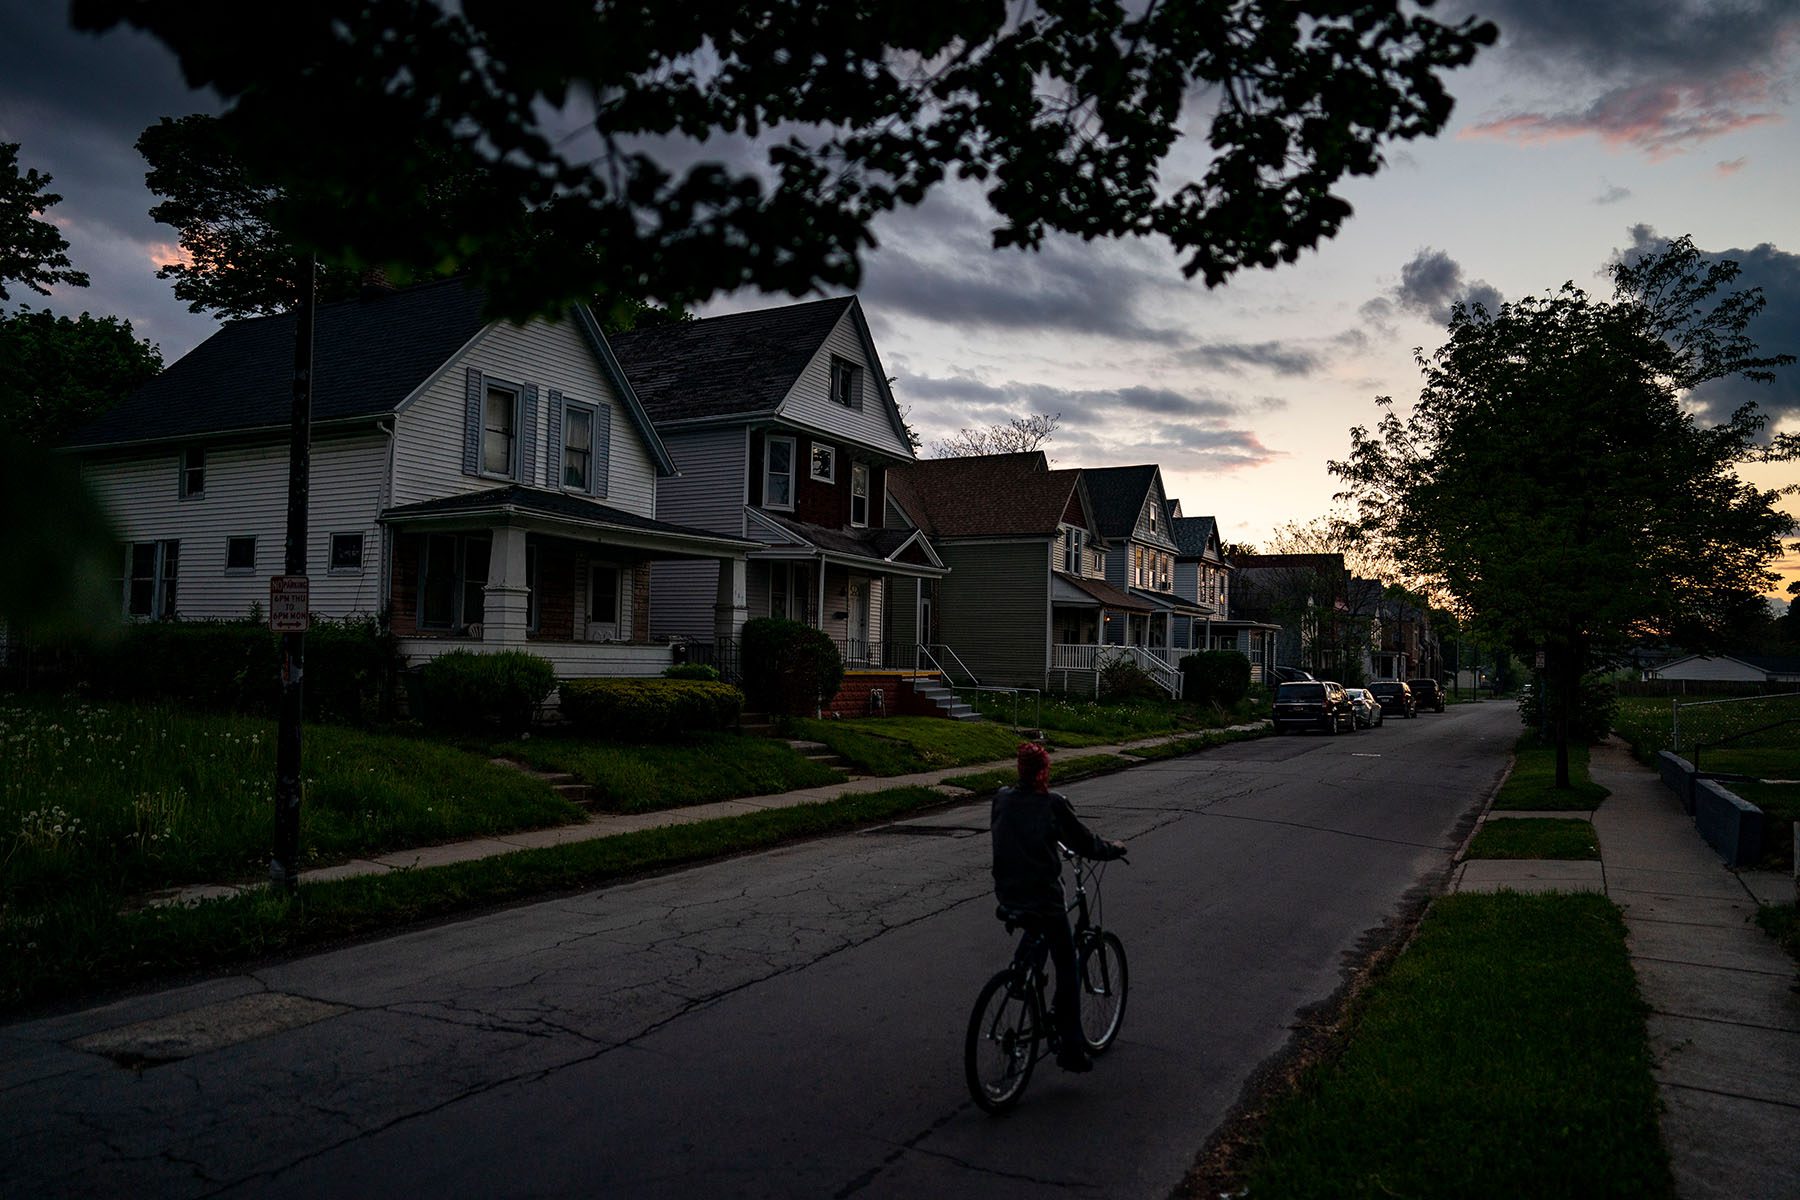 A person rides a bike along a residential street at sunset.